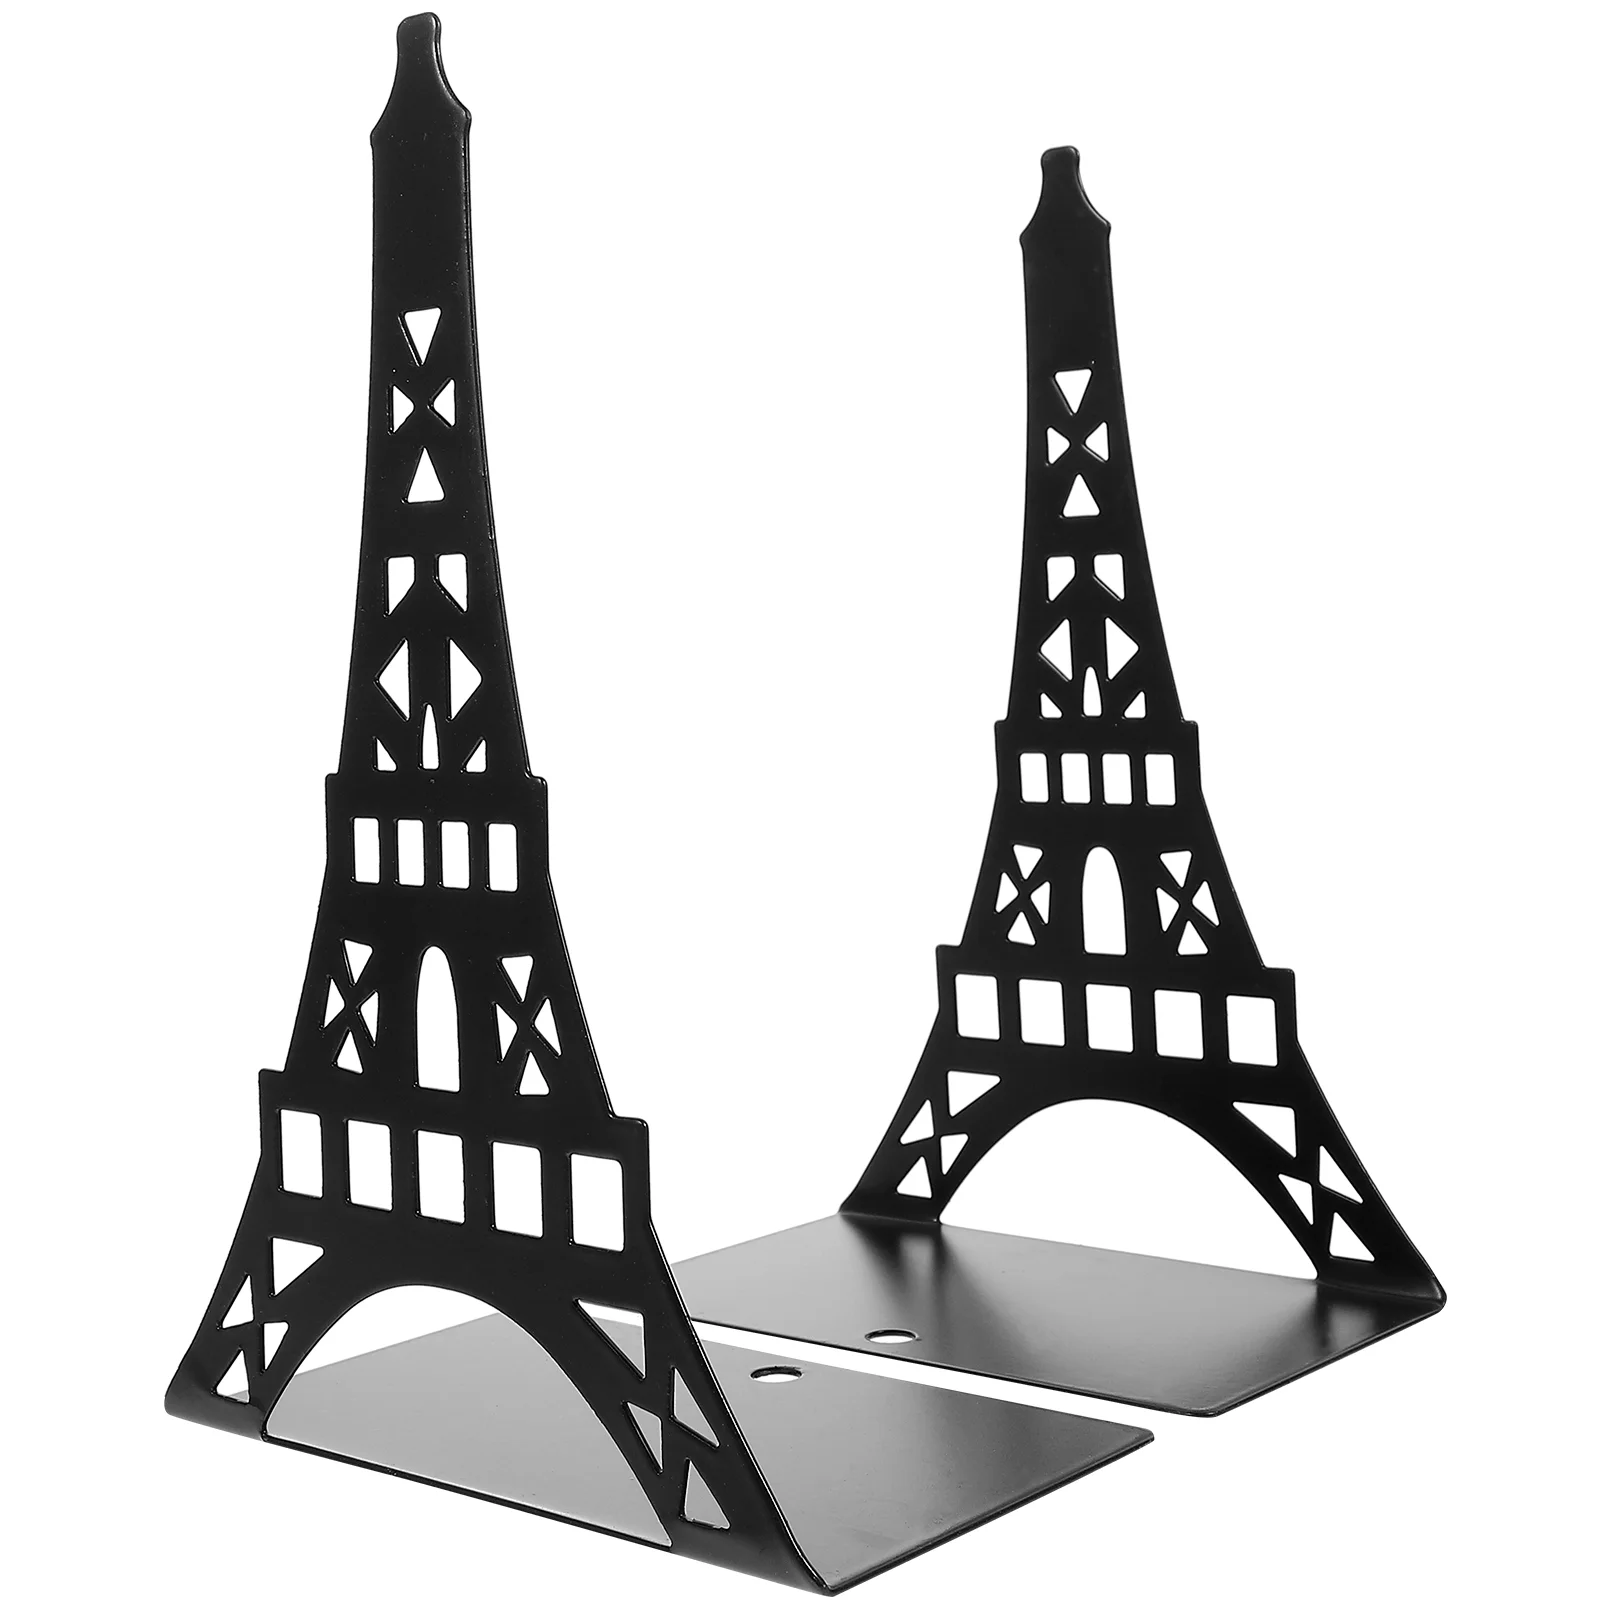 2Pcs Reusable Book Holders Tower Shape Book Holders Metal Book Ends File Book Organizer 2pcs book organizer silhouette hollowed tower book ends desktop file book holders